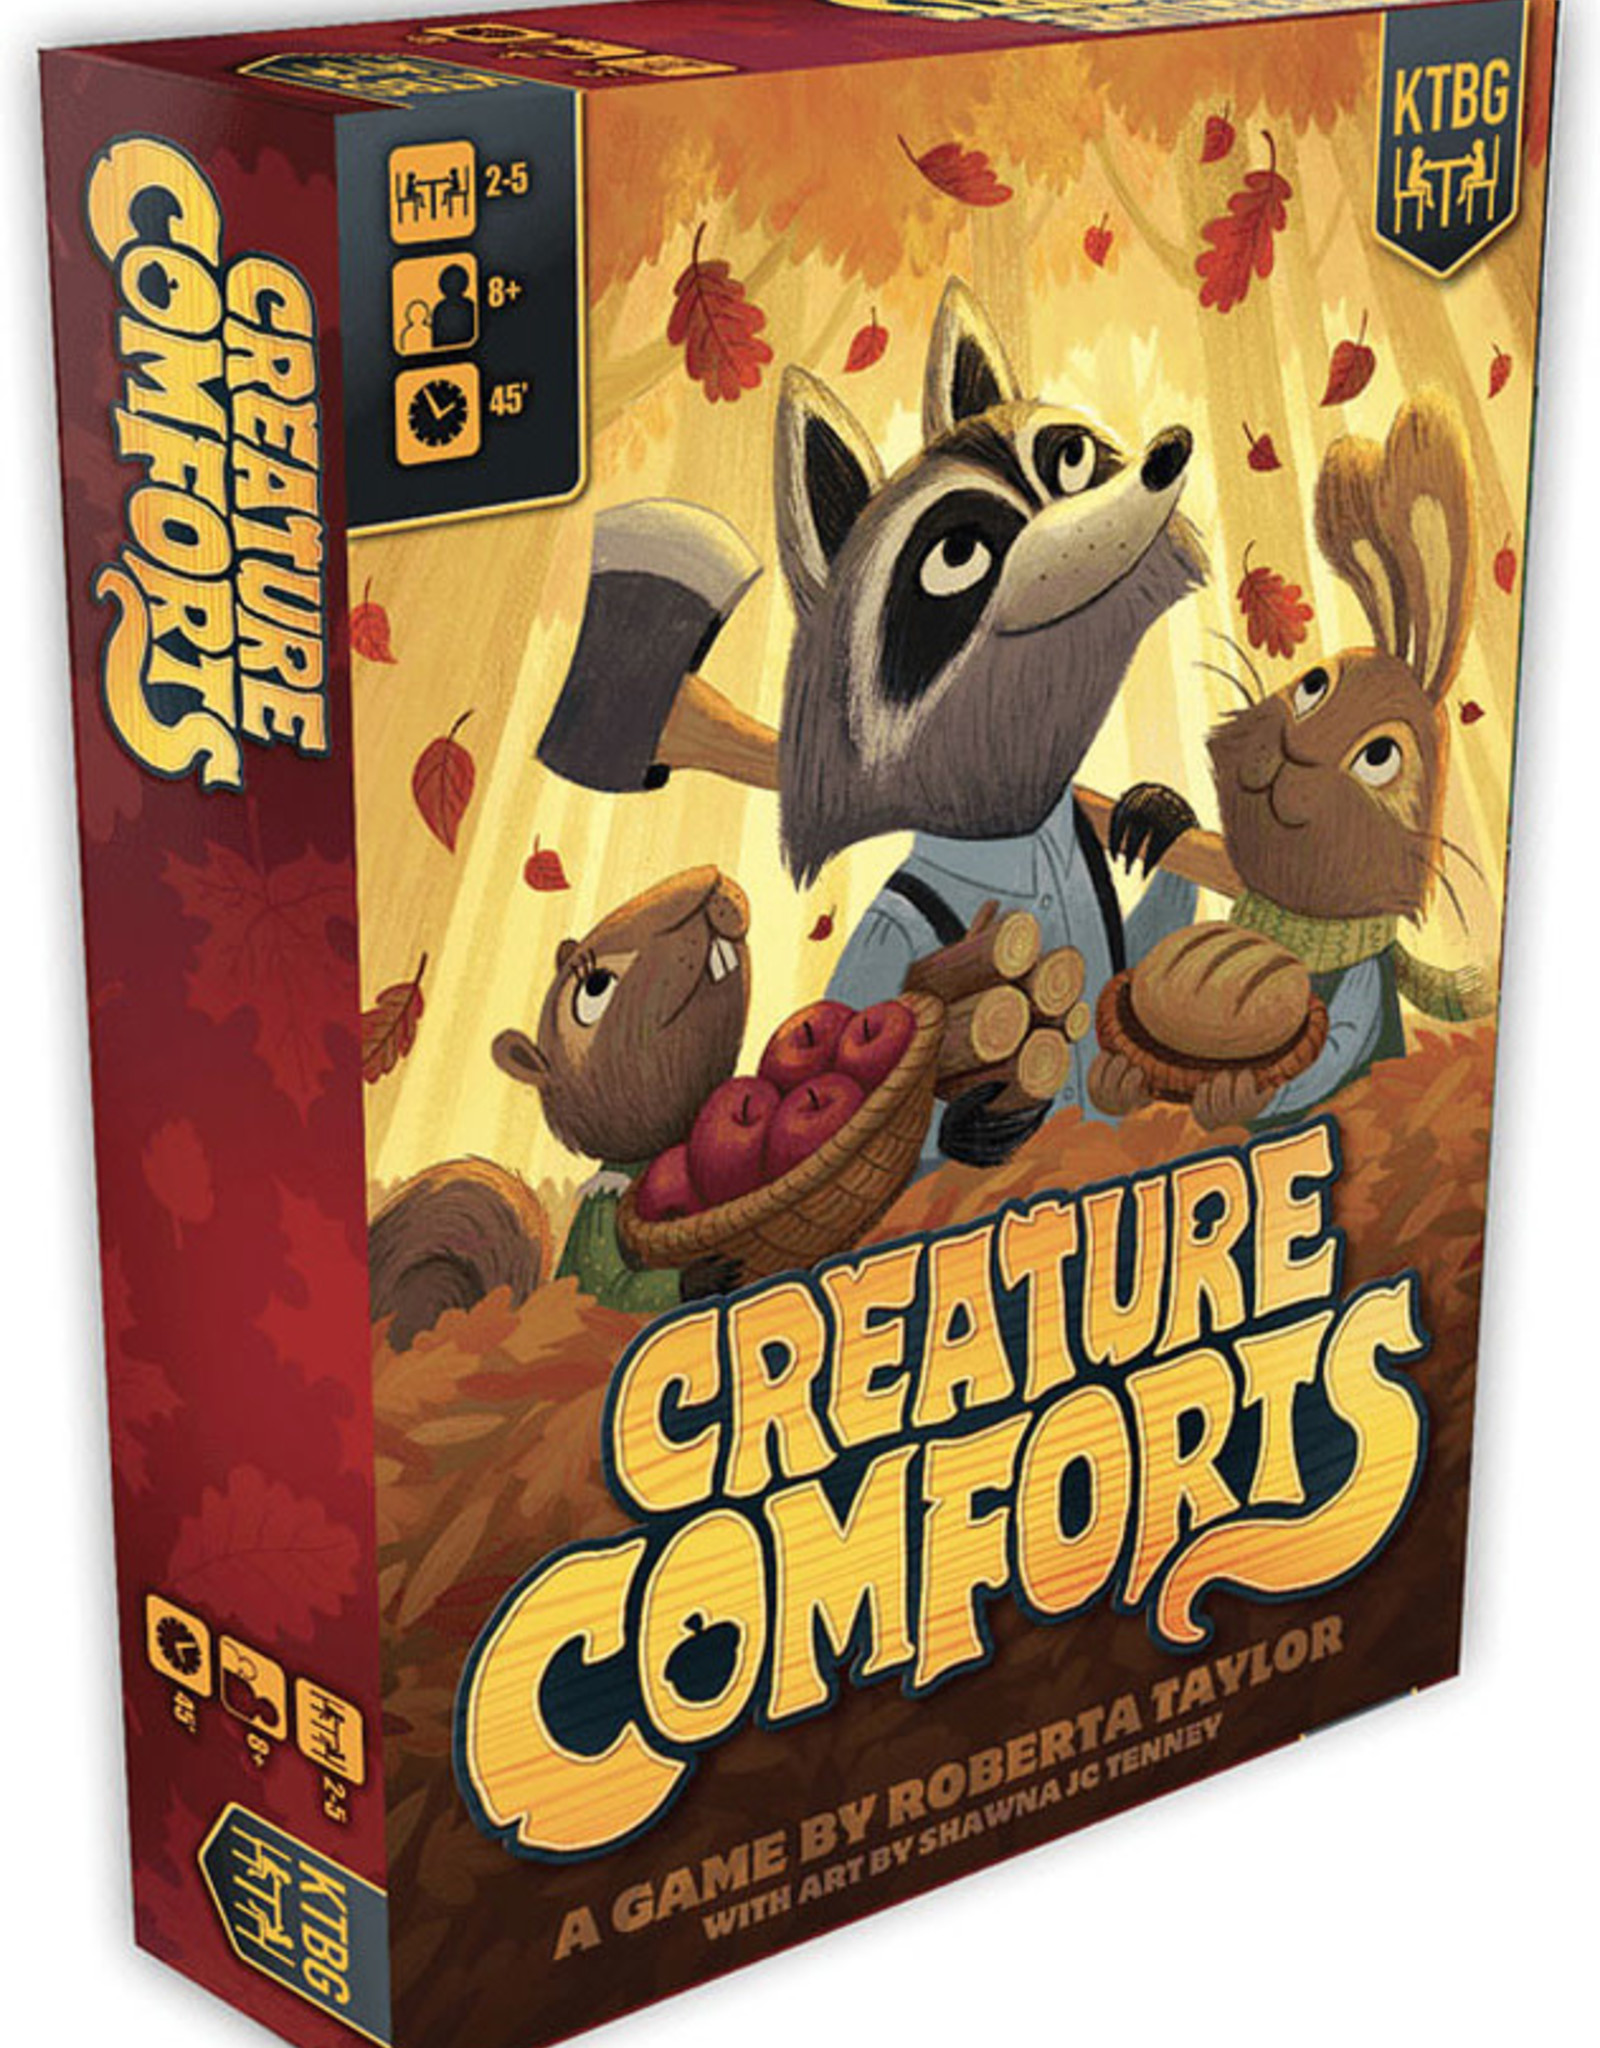 ACD TOYS GAMES CREATURE COMFORTS